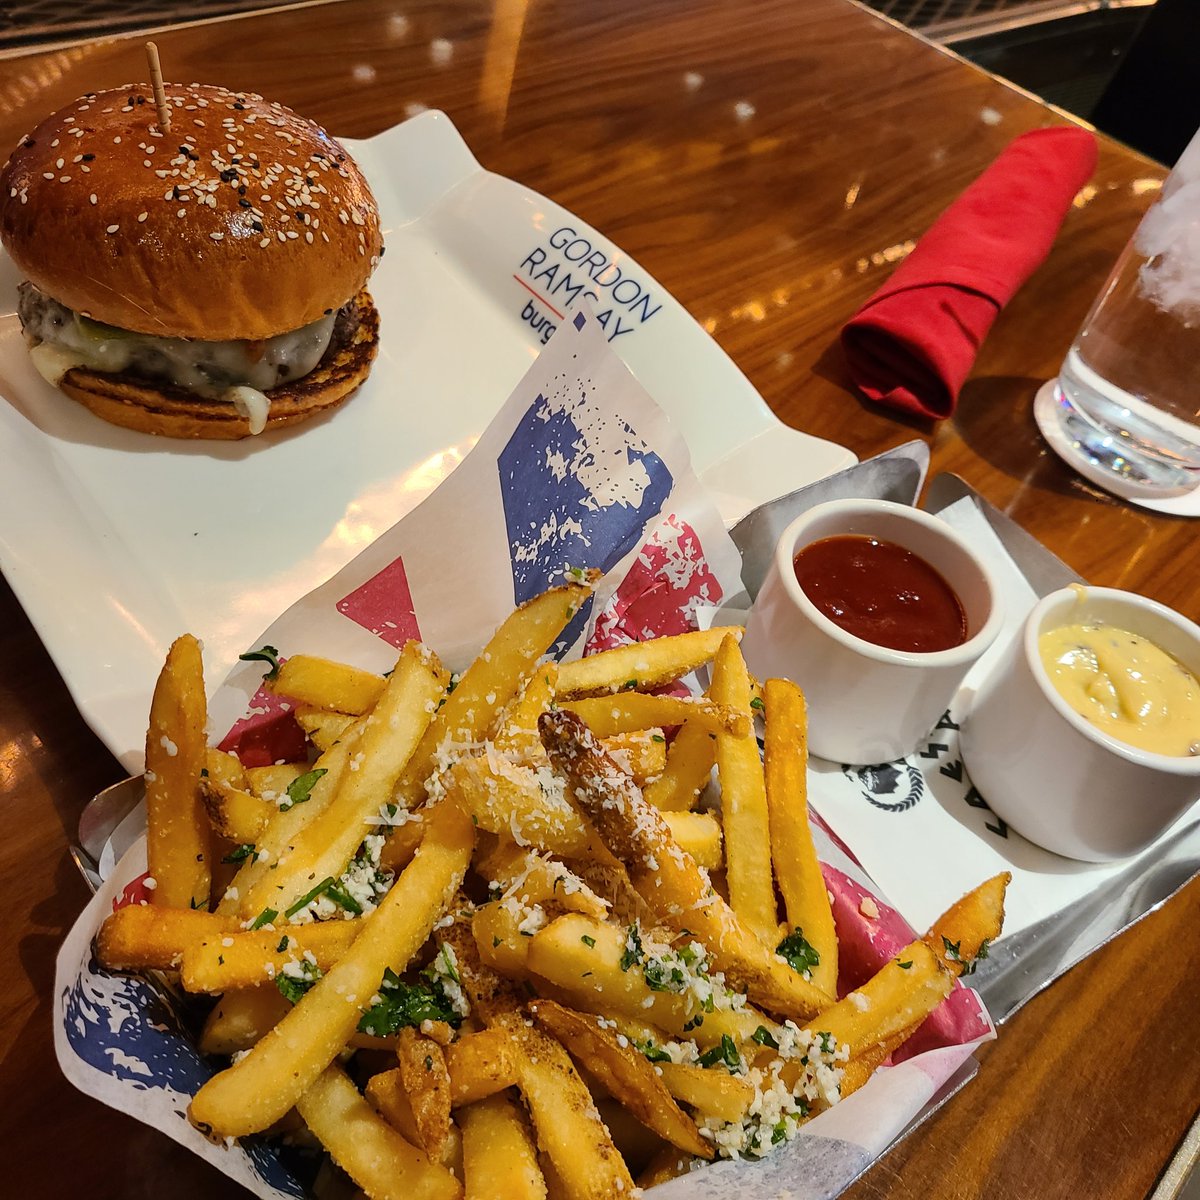 Vegas, day 4. I'm not sure if Gordon Ramsay's minions' burger can top my own, but their truffle fries are perfect. https://t.co/kODqoX3zw5